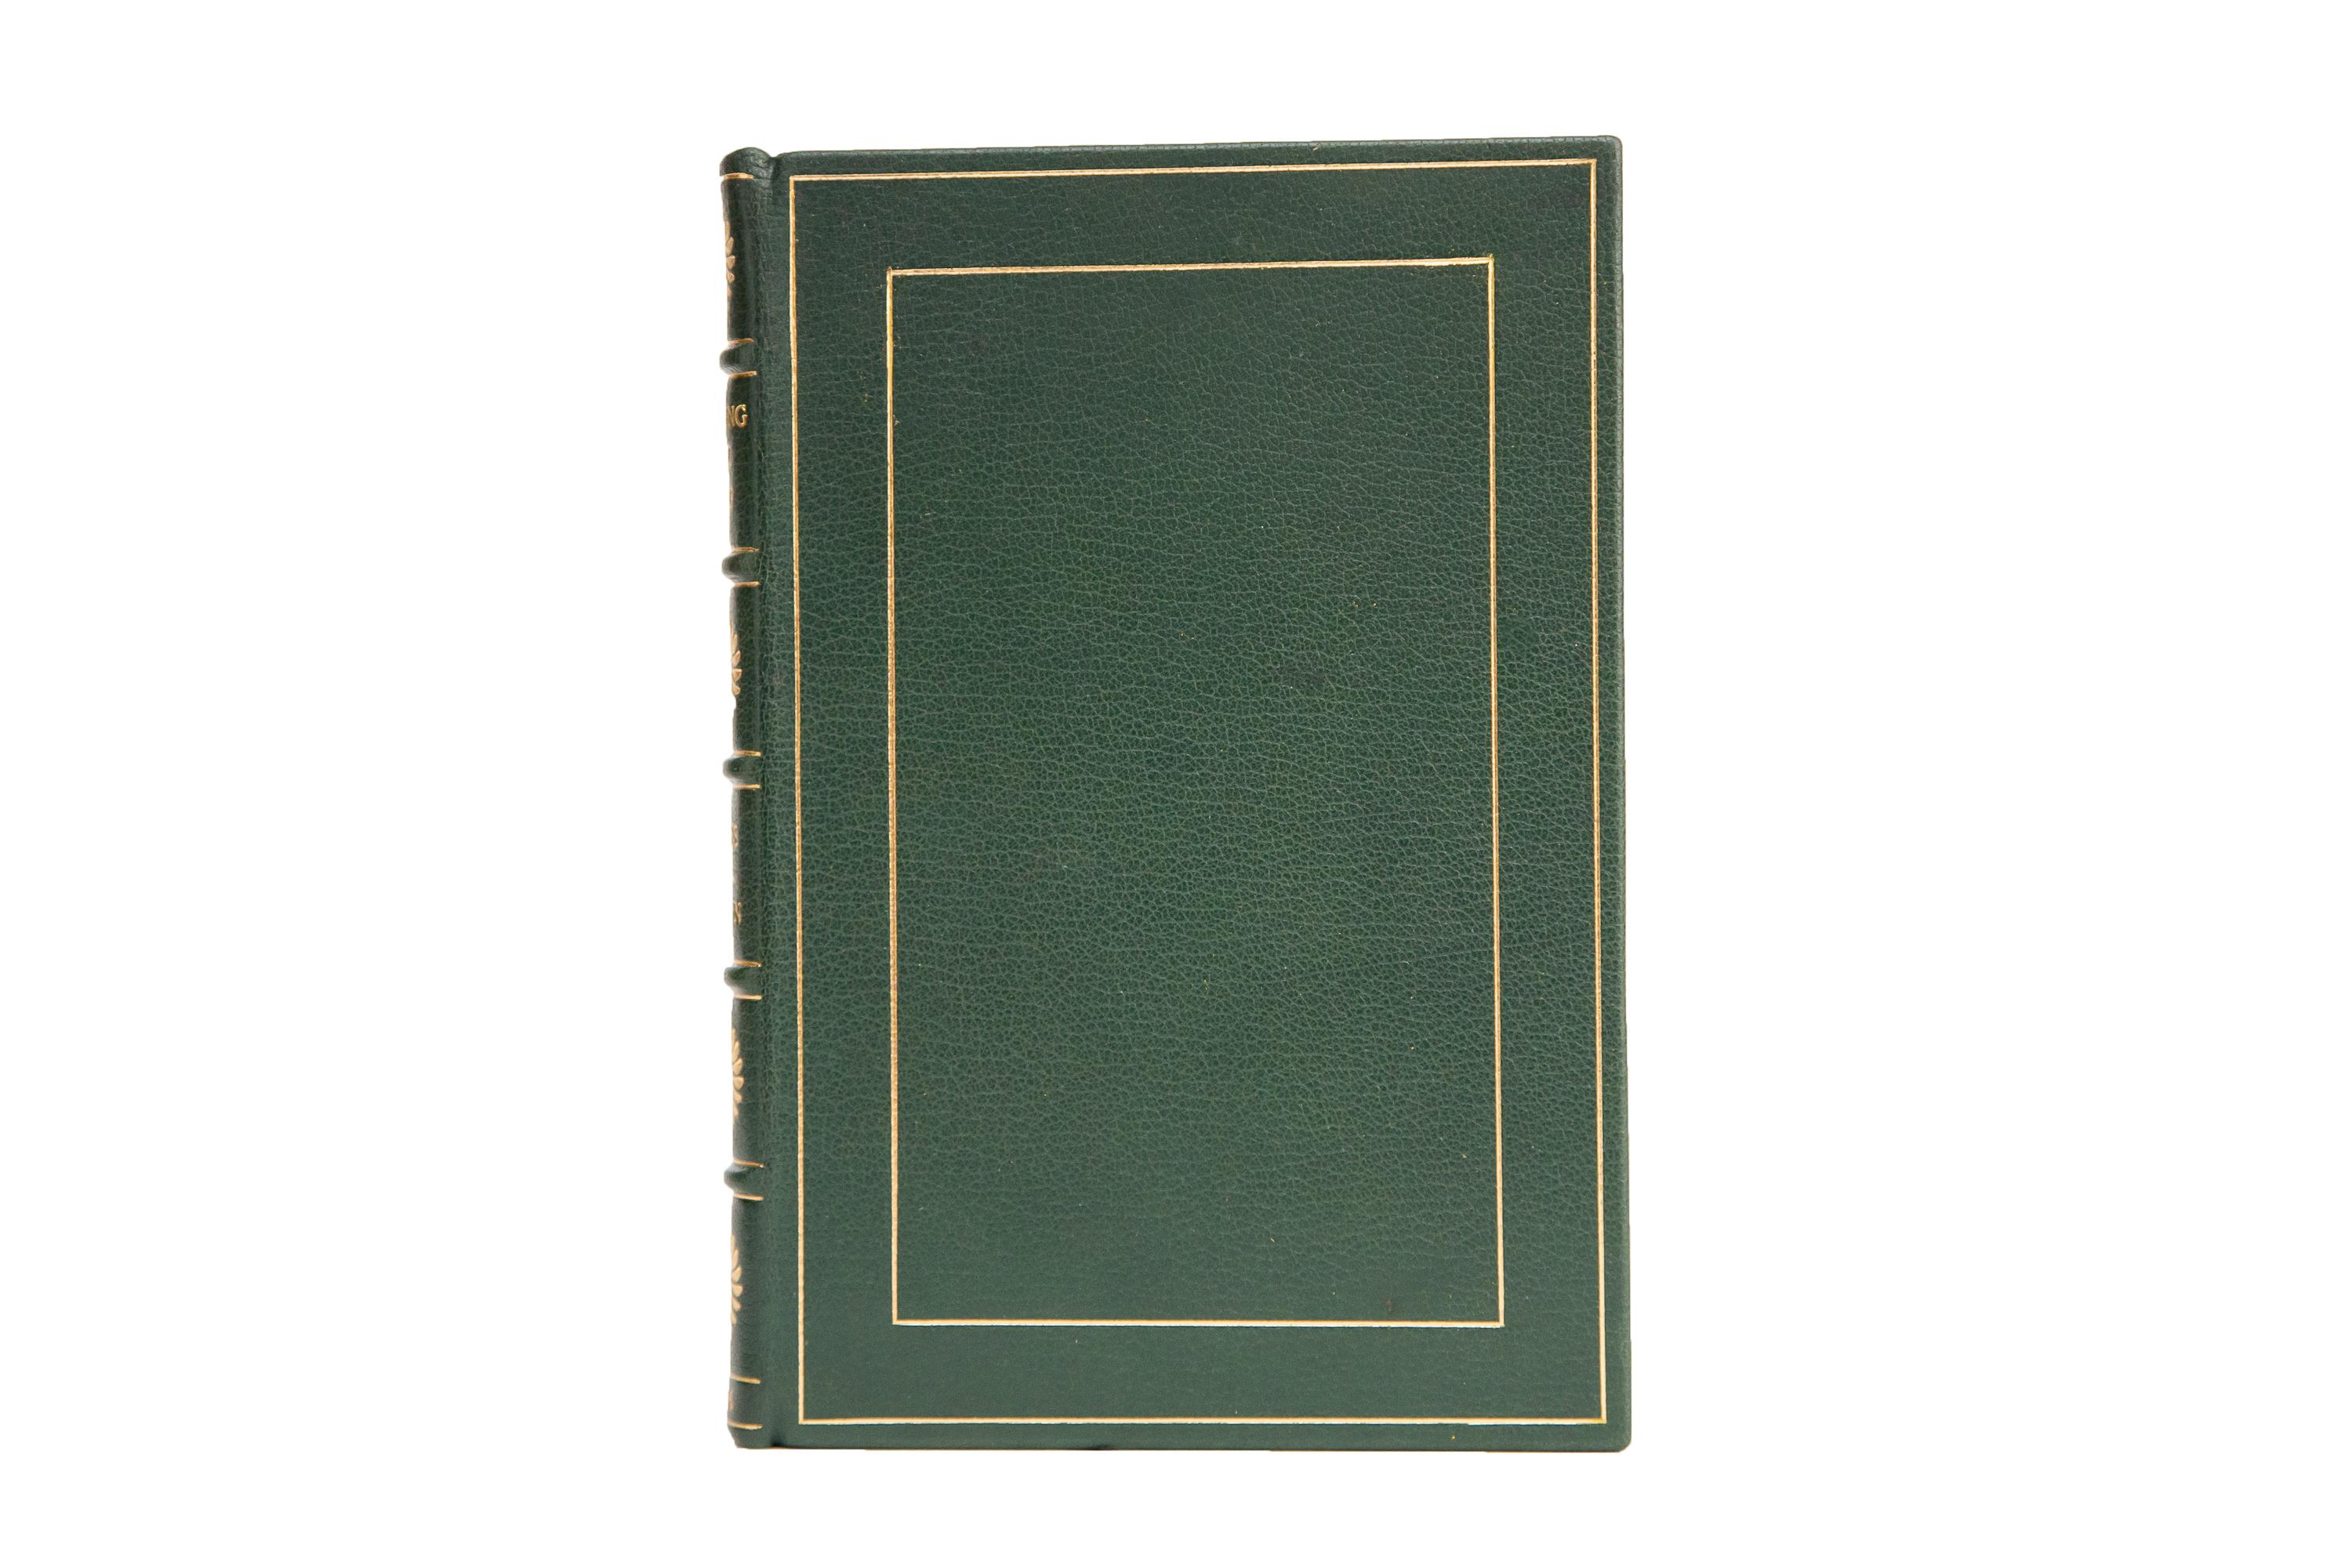 1 Volume. Ernest Jones and Innis Brown, swinging into golf. First edition. Bound in full green morocco with covers displaying a gilt double-ruled border. Raised bands gilt with panels displaying large flowers and label lettering, both in gilt